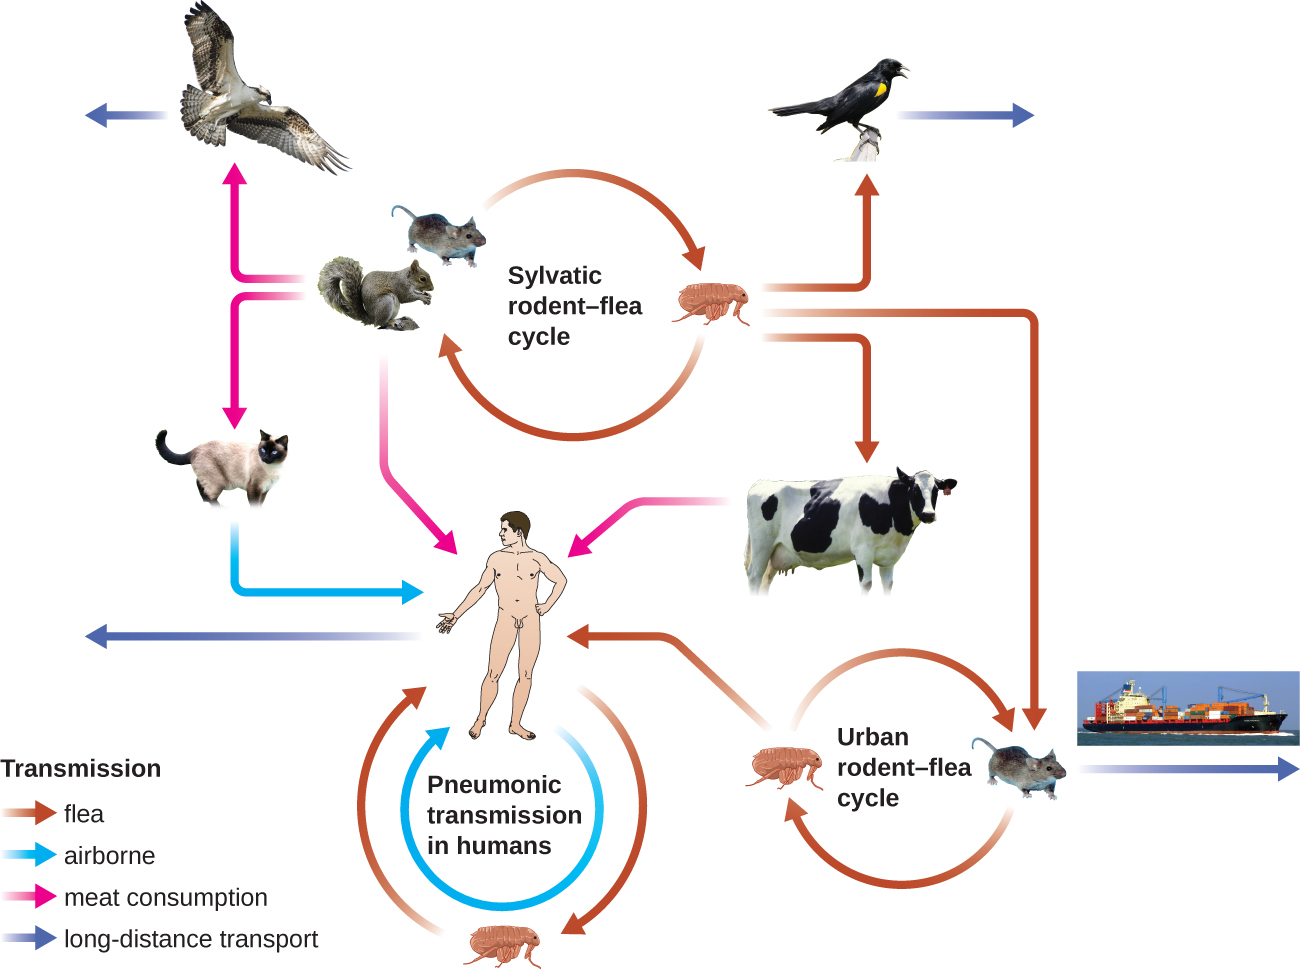 Diagram of plague transmission. The sylvantic rodent-flea cycle is when rodents (such as squirrels and chipmunks) and fleas transmit the pathogen to each other. Fleas and rodents can also transmit the pathogen to birds, which can carry the pathogen long distances. Fleas can also transmit to cows, which can then transmit to humans. Fleas can also transmit to rodents,  which are involved in long-distance transport if the travel on a boat. The urban rodent-flea cycle is when urban rodents (such as mice) and fleas transmit the pathogen to each other. Fleas can infect humans. Pneumonic transmission in humans is when one human transmits to another via the airborne route. Humans can carry the pathogen long distances when they travel. The squirrels and chipmunks in the sylvatic cycle can also transmit to humans; or they can transmit to cats which can then transmit to humans.